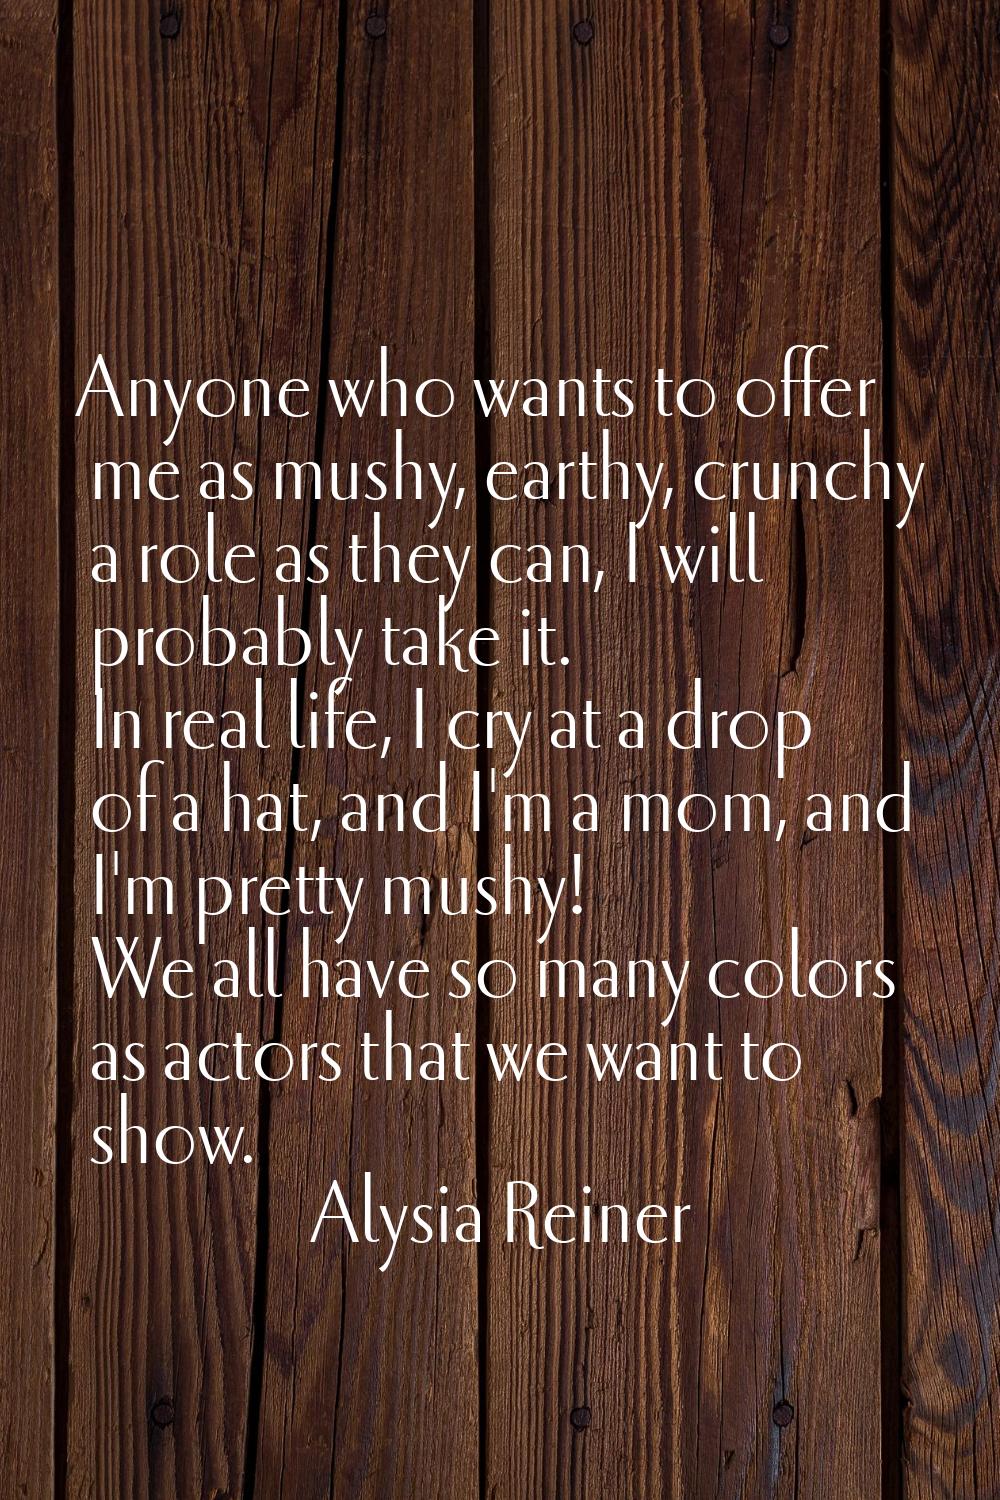 Anyone who wants to offer me as mushy, earthy, crunchy a role as they can, I will probably take it.